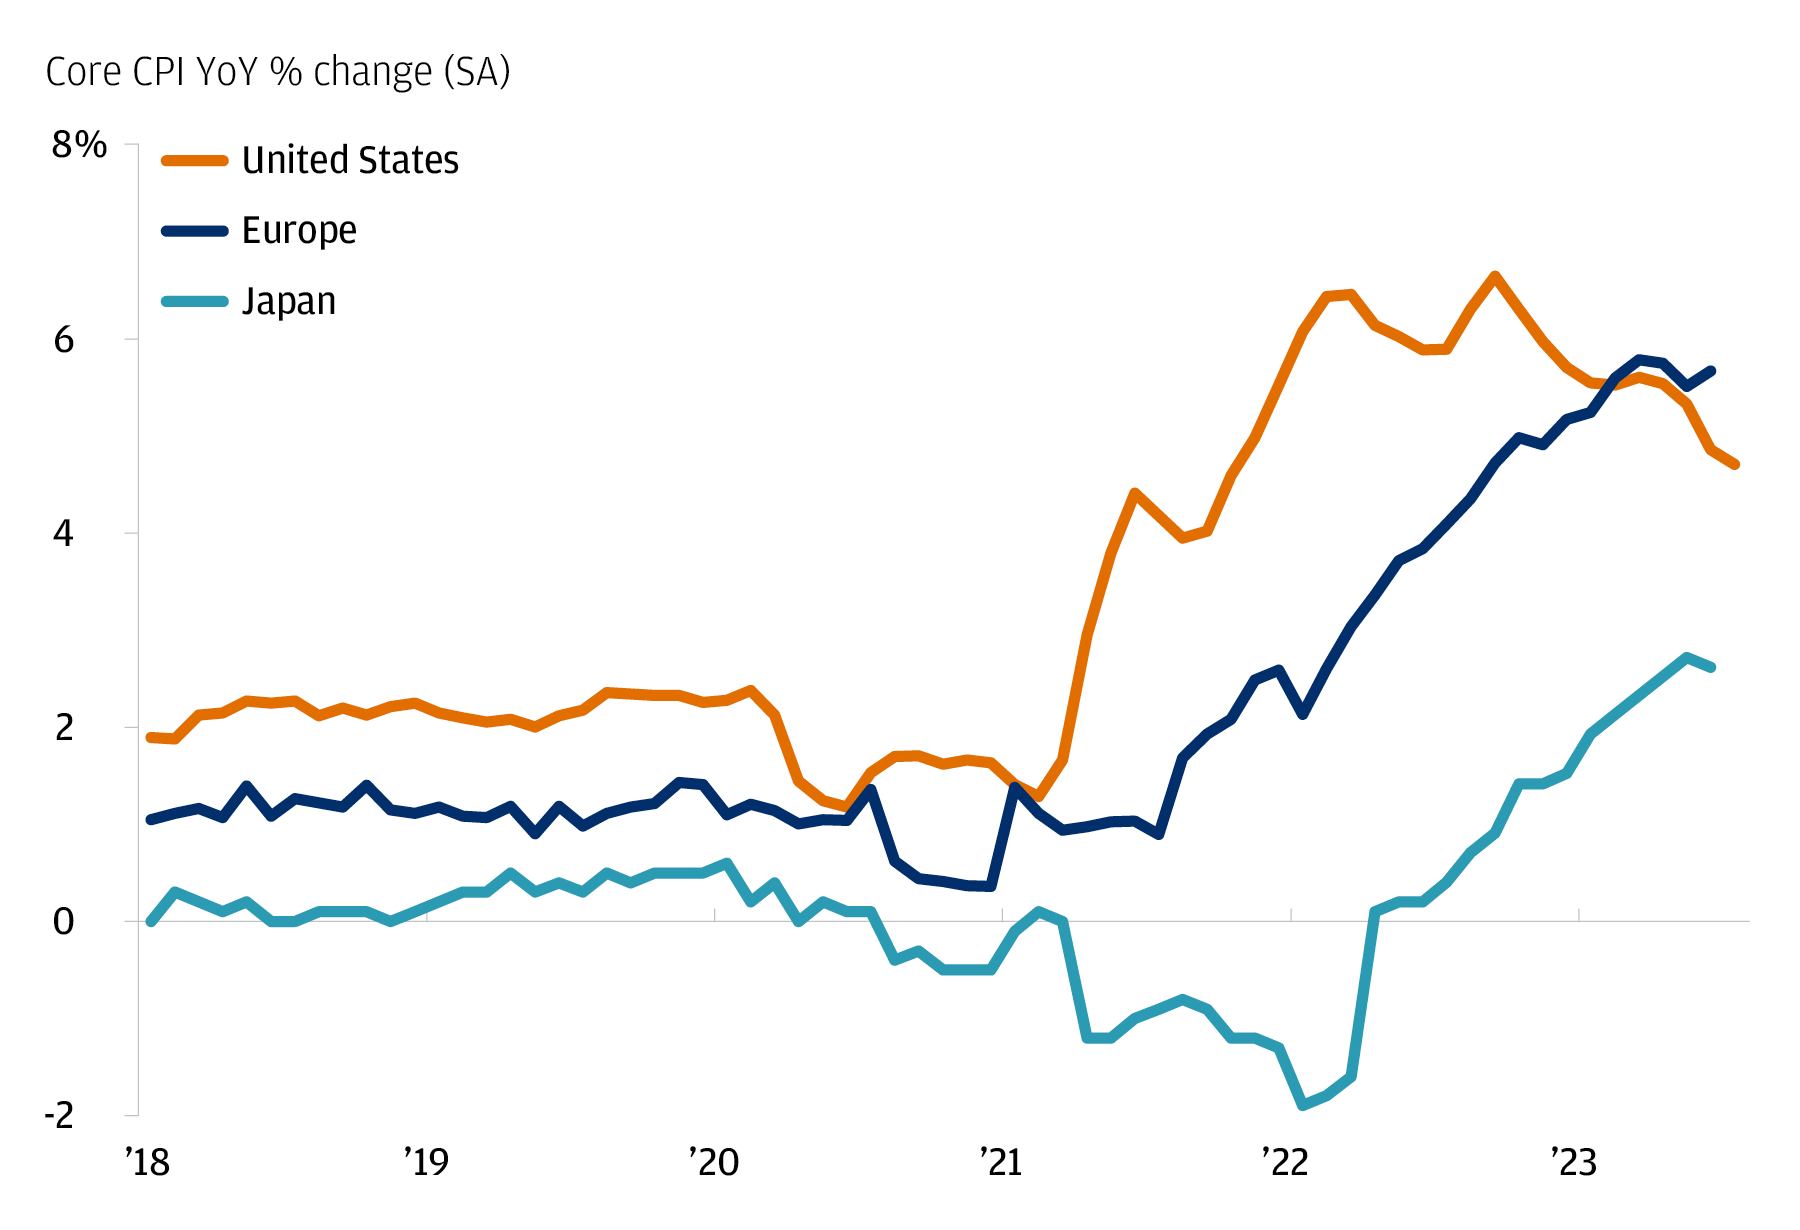 The chart describes the YoY % Change of Core CPI for Europe, Japan, and the U.S.